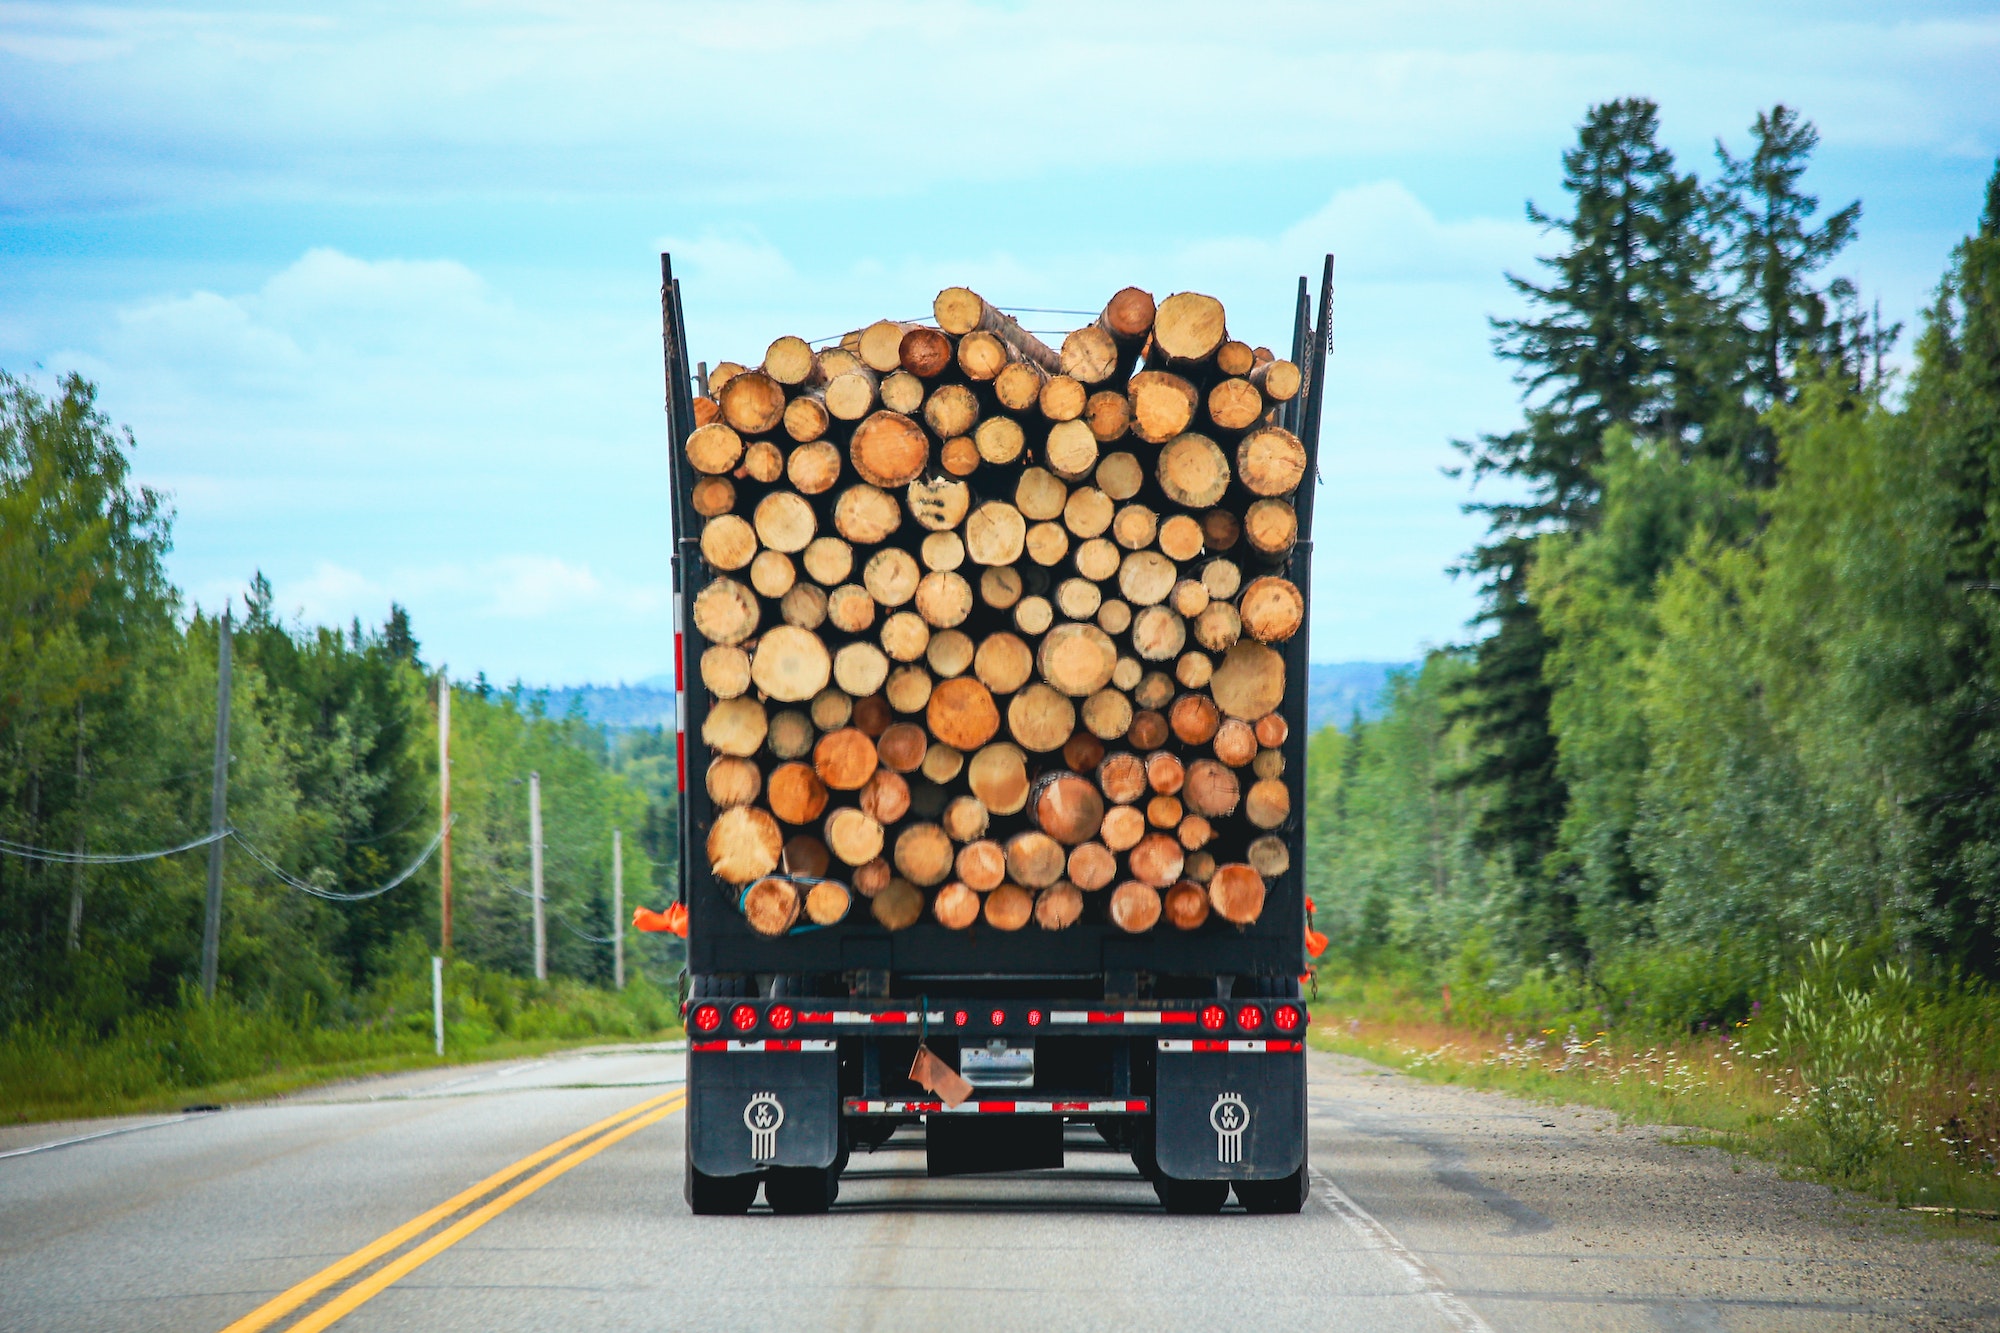 Back view of a big logging truck hauling a full load of logs down the highway.